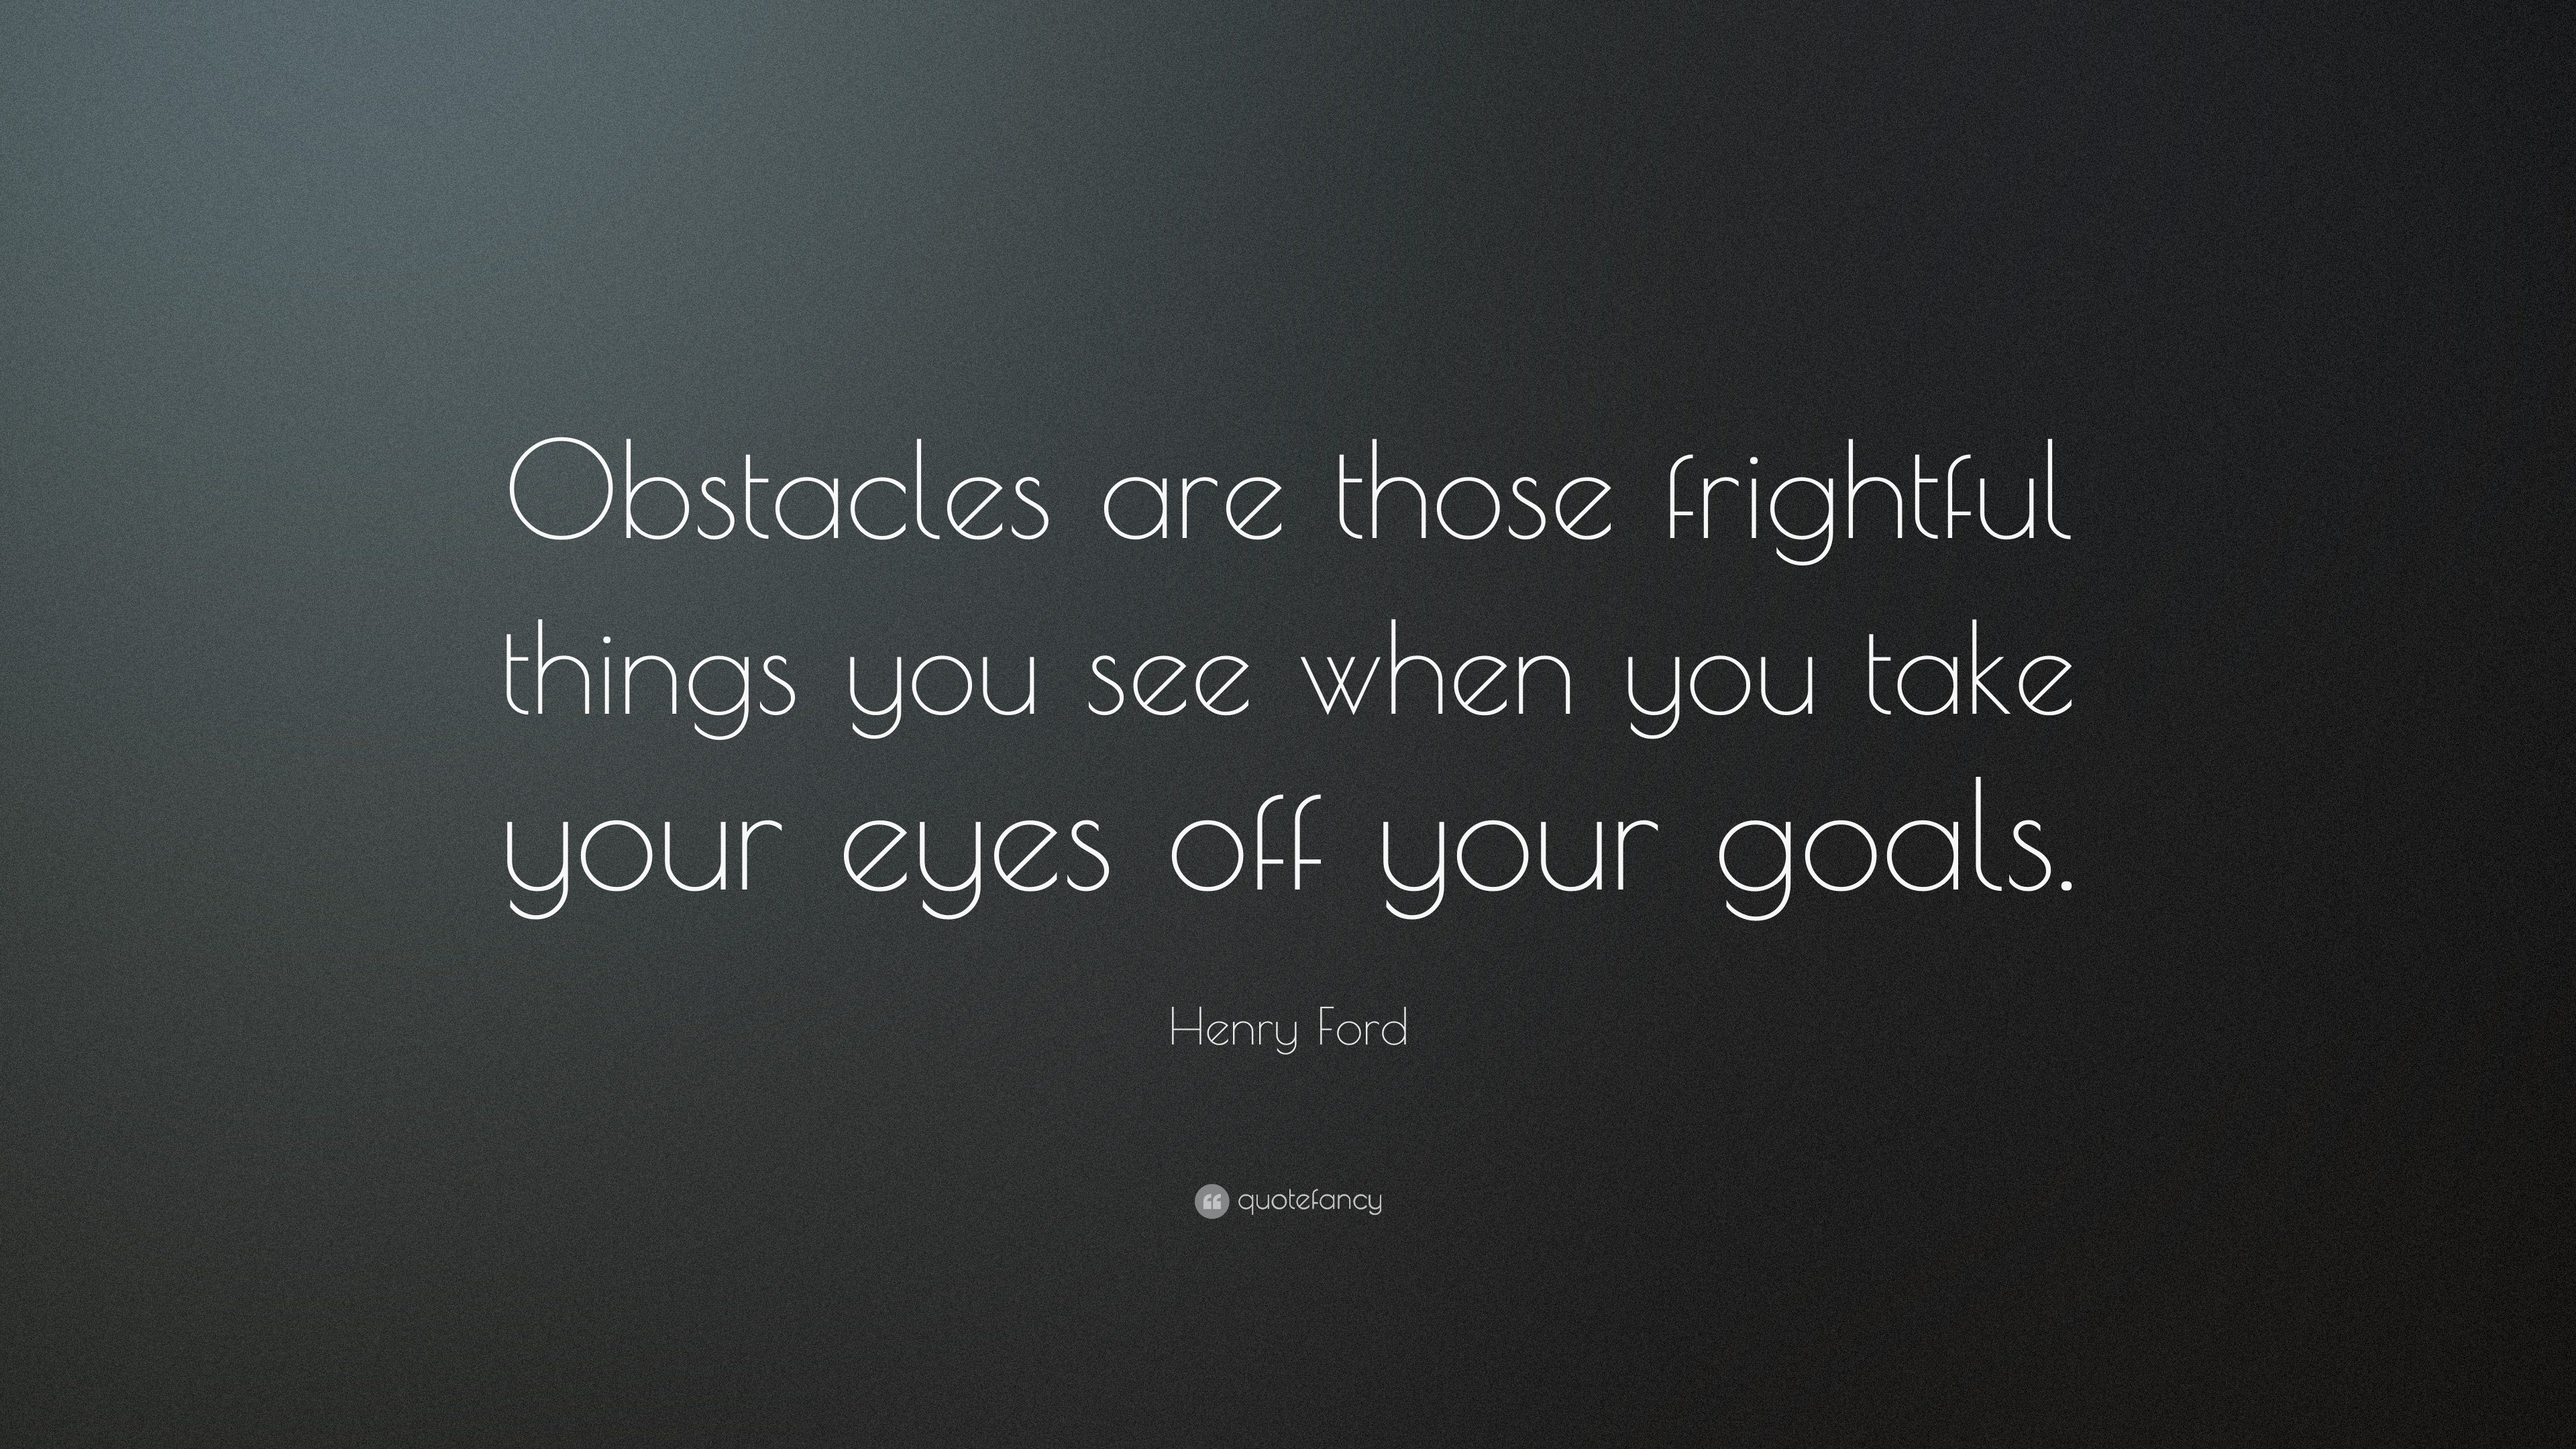 Henry ford quote obstacles #10